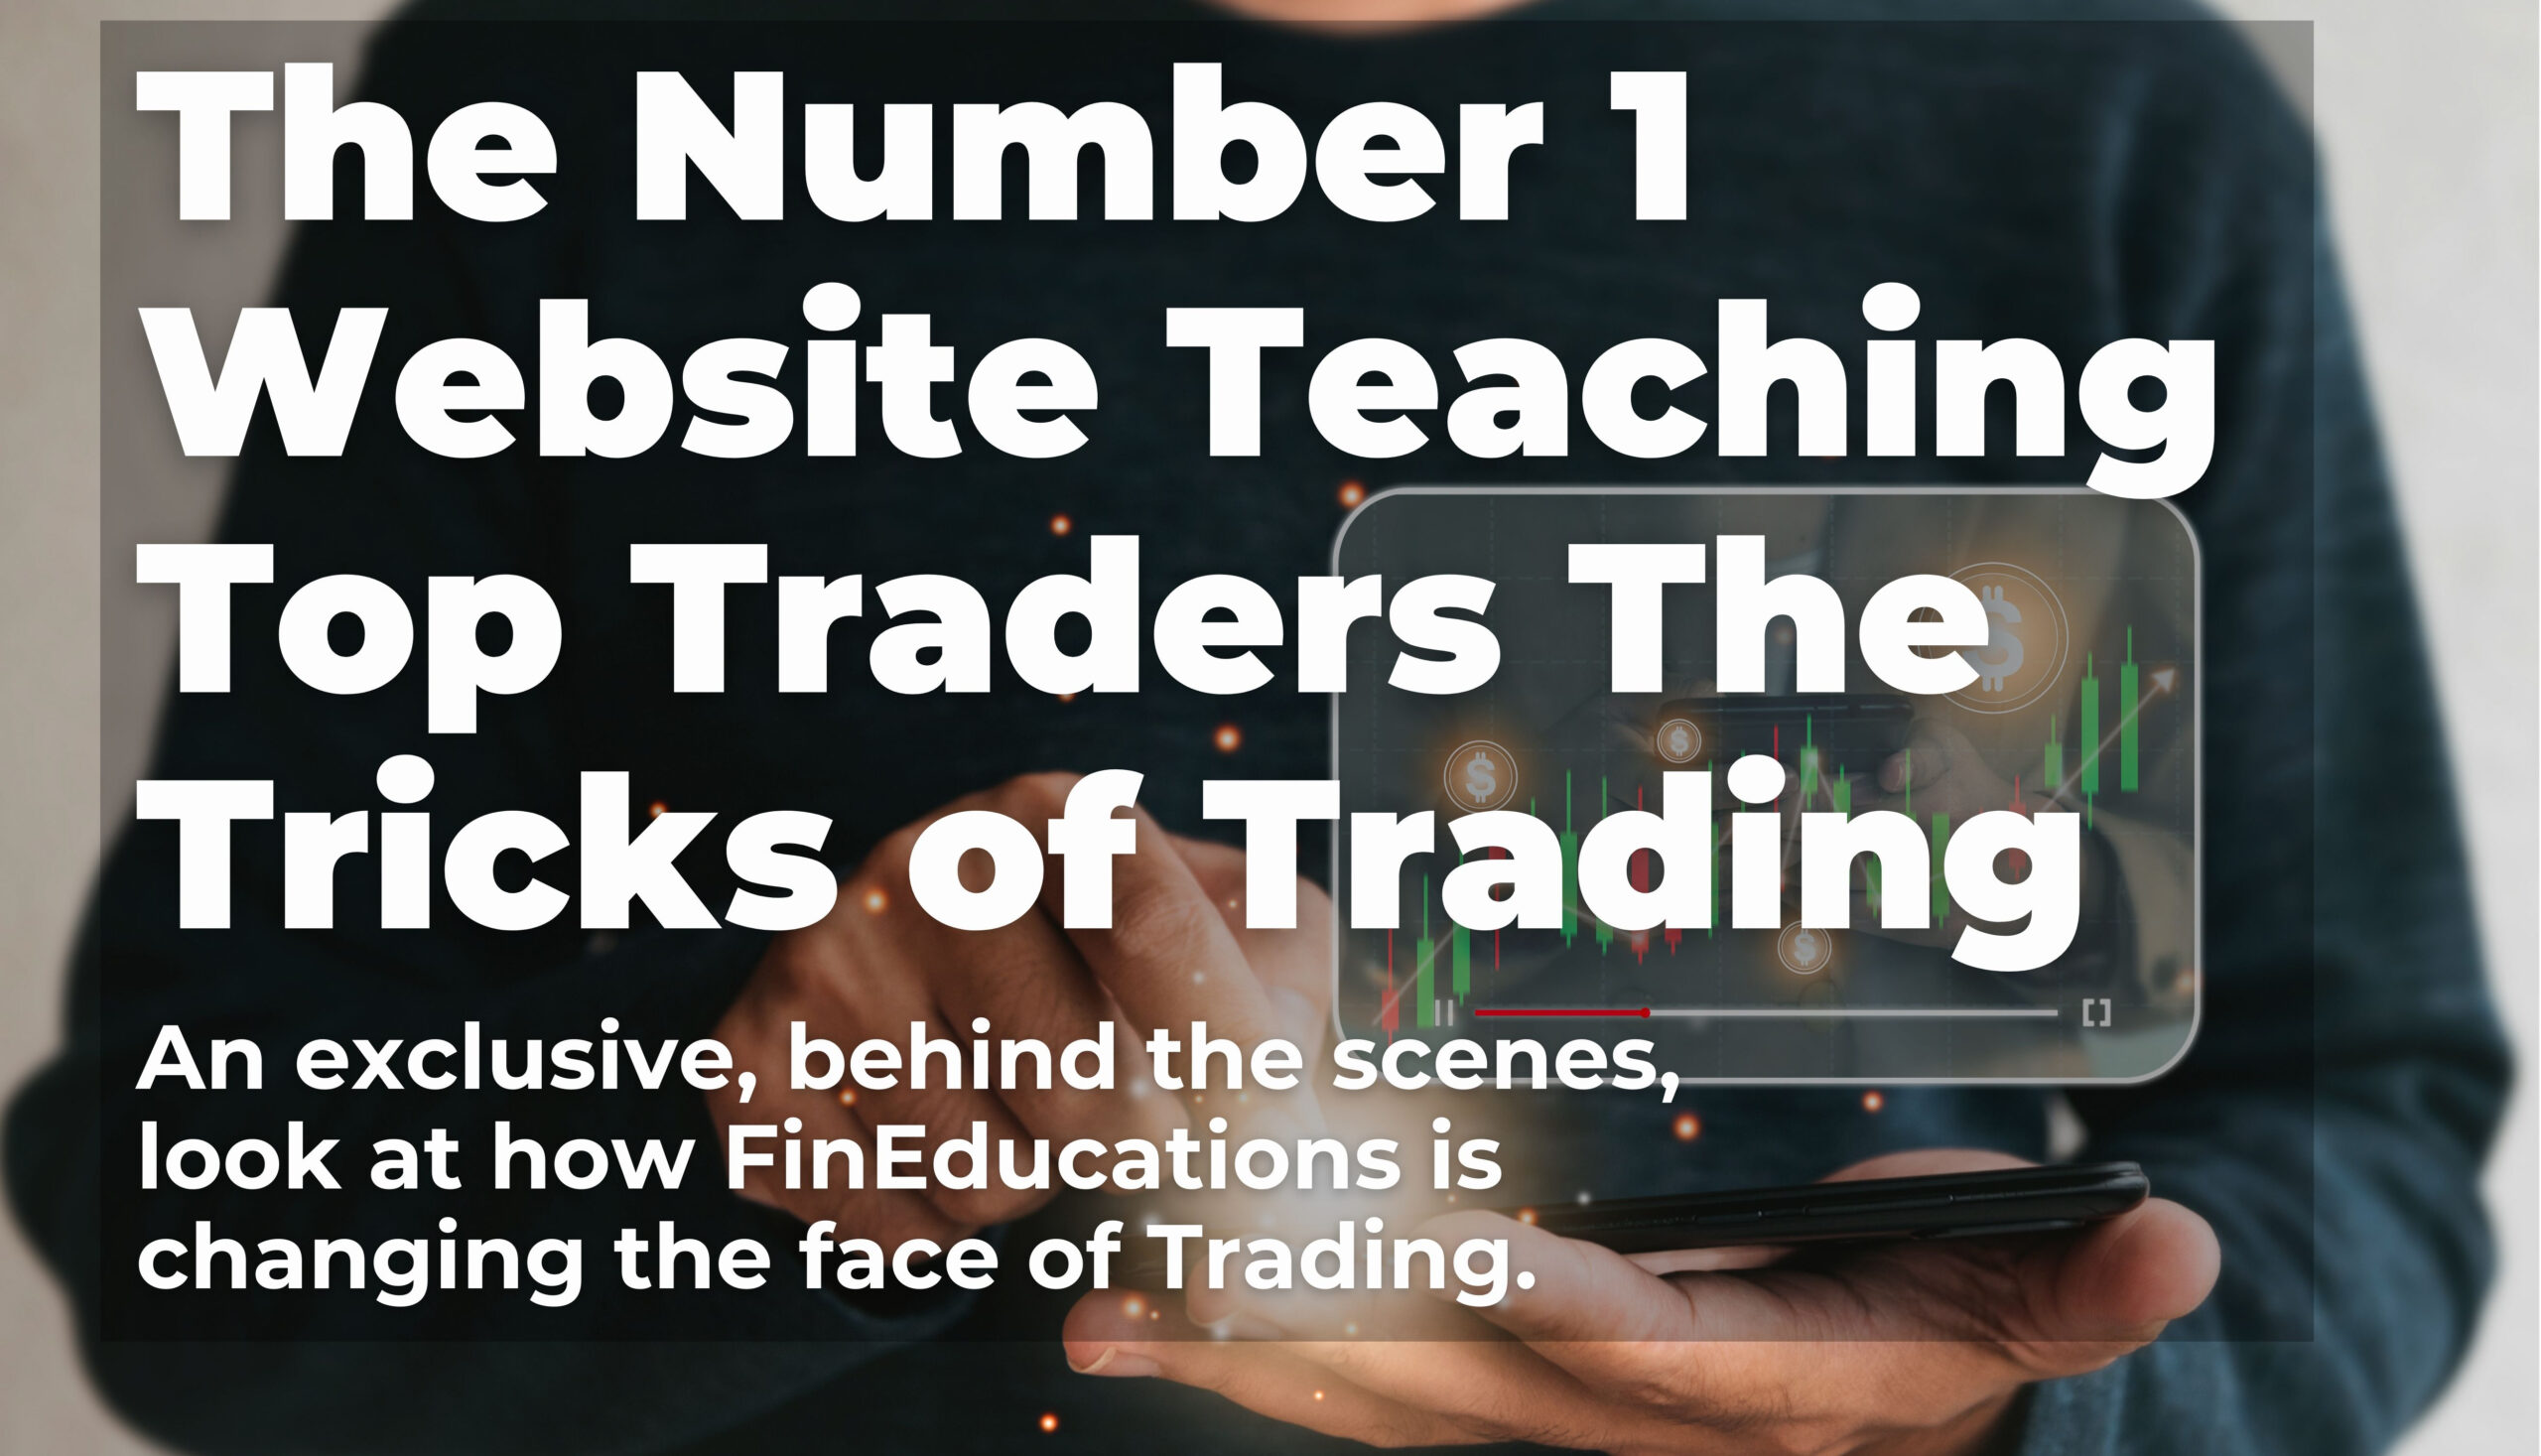 The Number 1 Website Teaching Top Traders the Tricks of Trading